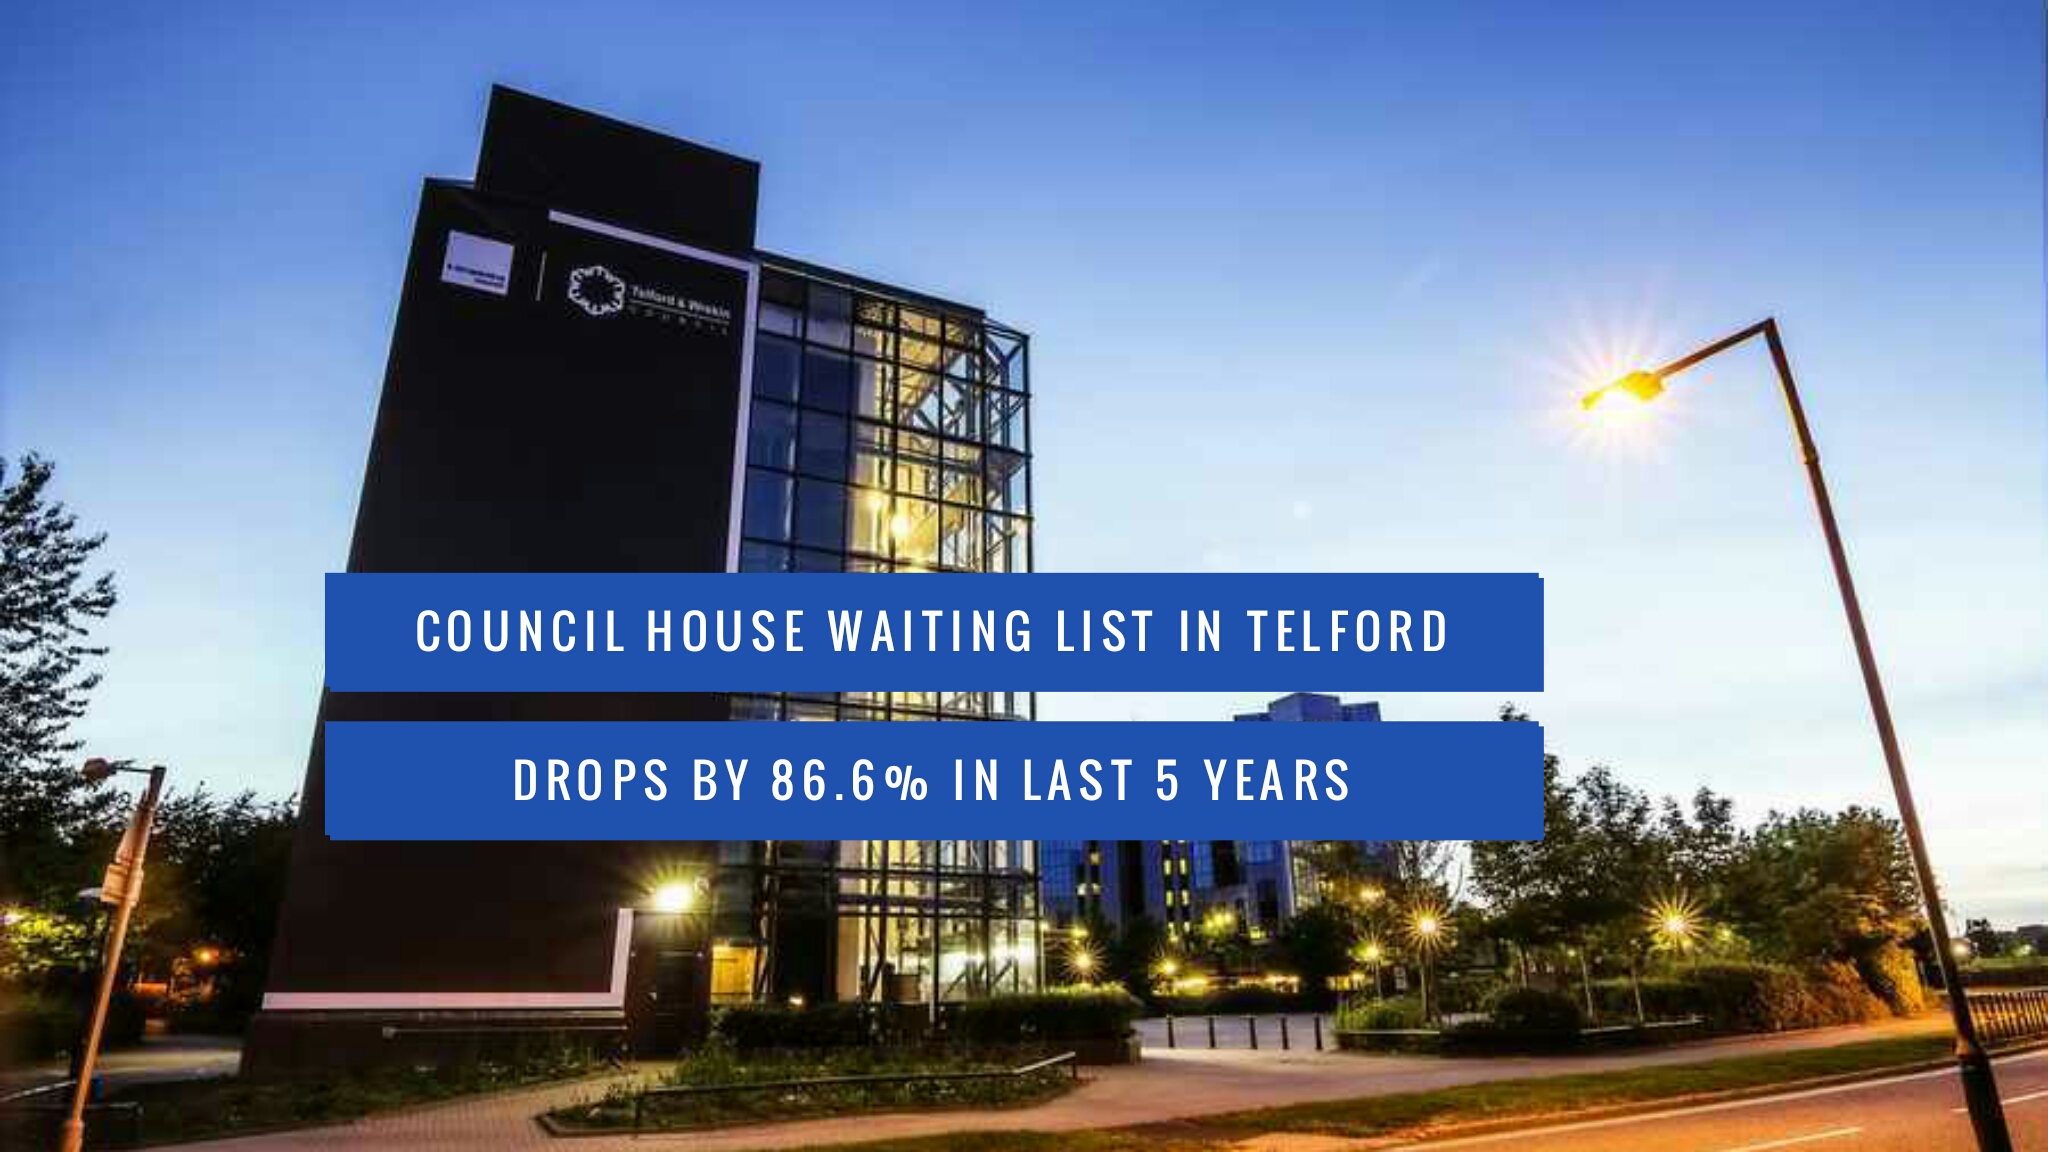 Council House Waiting List in Telford Drops by 86.6% in last 5 years